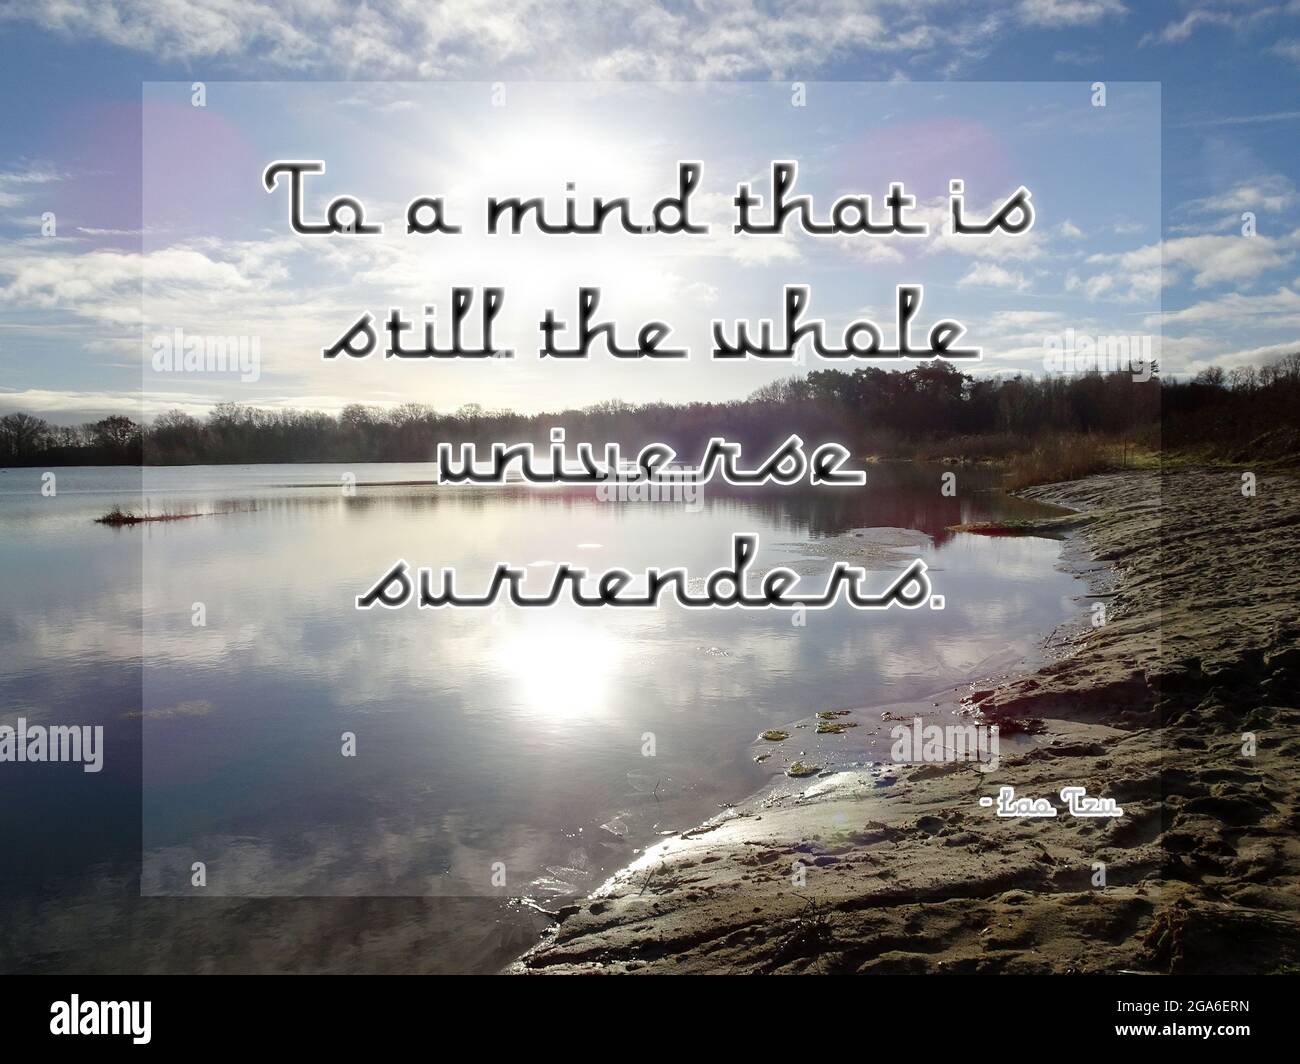 To a mind that is still the whole universe surrenders. Quote from Lao Tzu. Photo of a lake with reflections of a clouded sky. Stock Photo